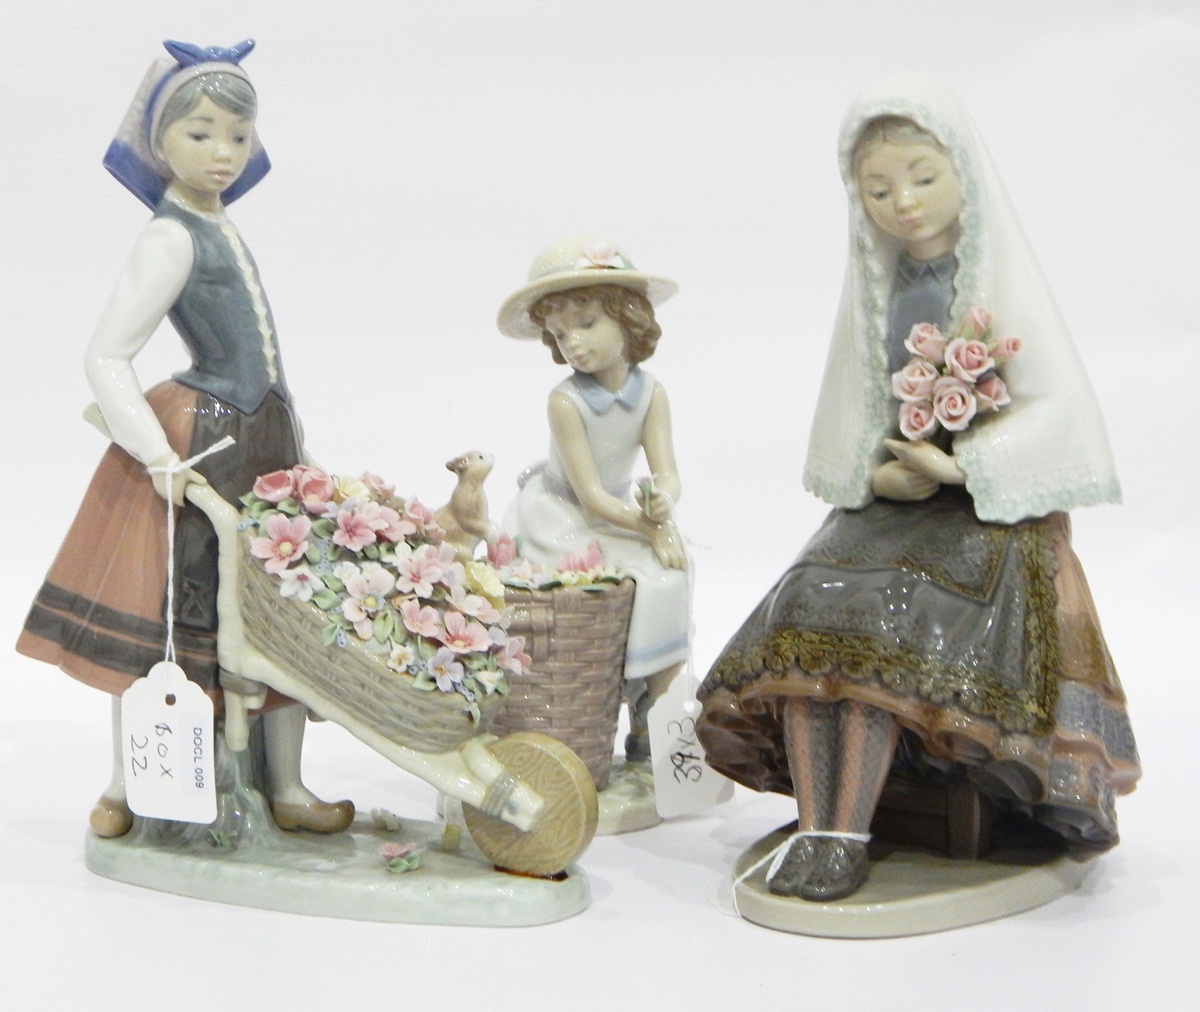 Lladro models of a Spanish dressed girl holding flowers, - Image 2 of 2